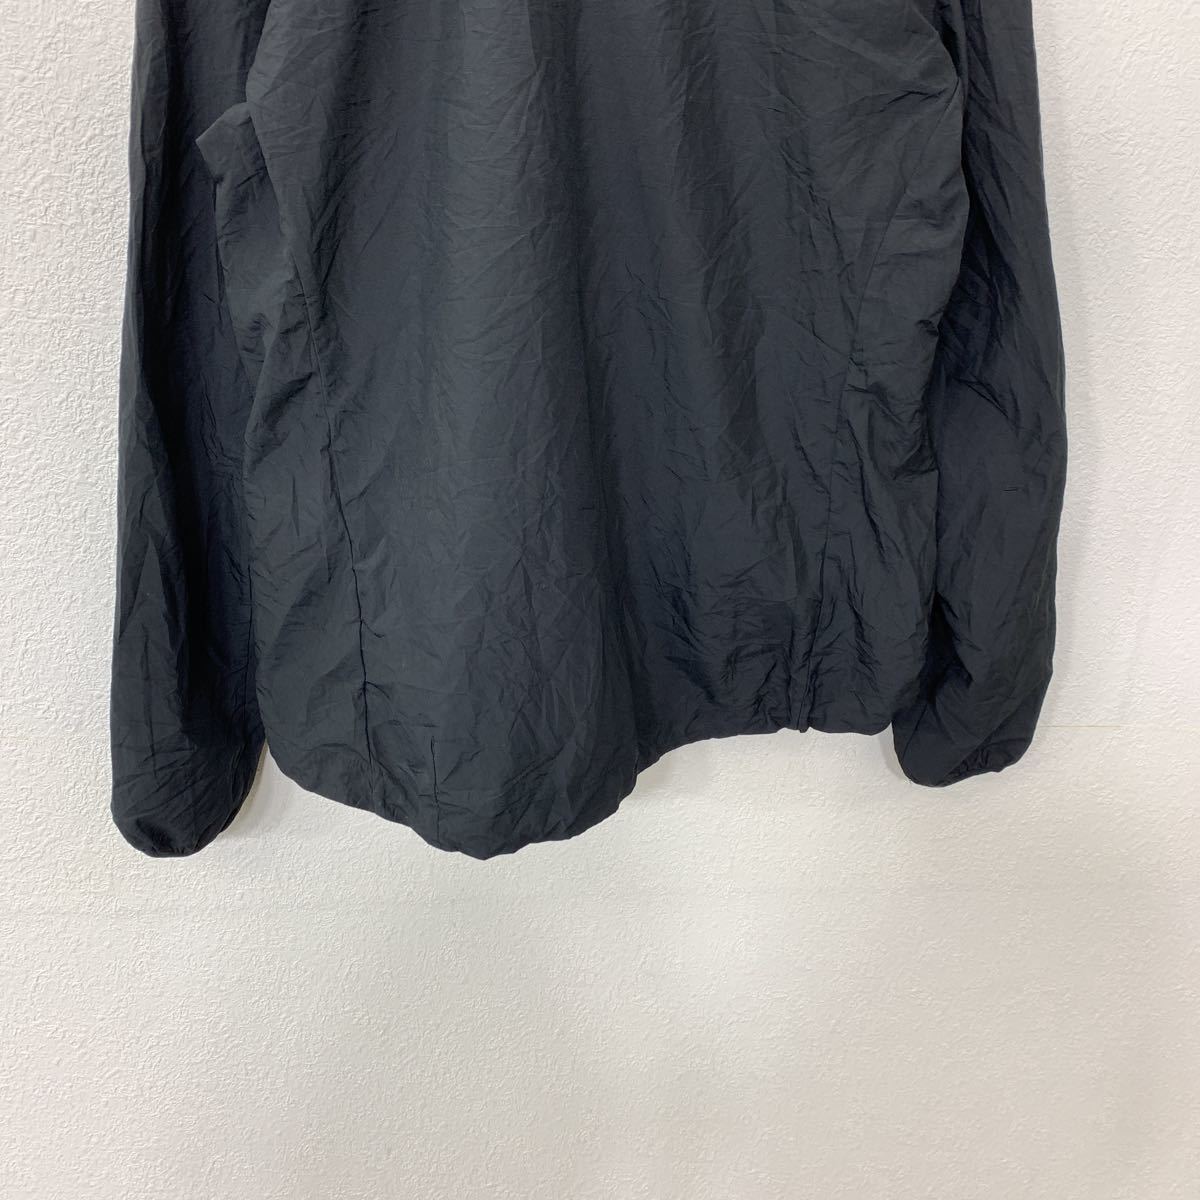 NIKE Zip up jacket L size Nike sports bra ndo black old clothes . America buying up t2206-3770